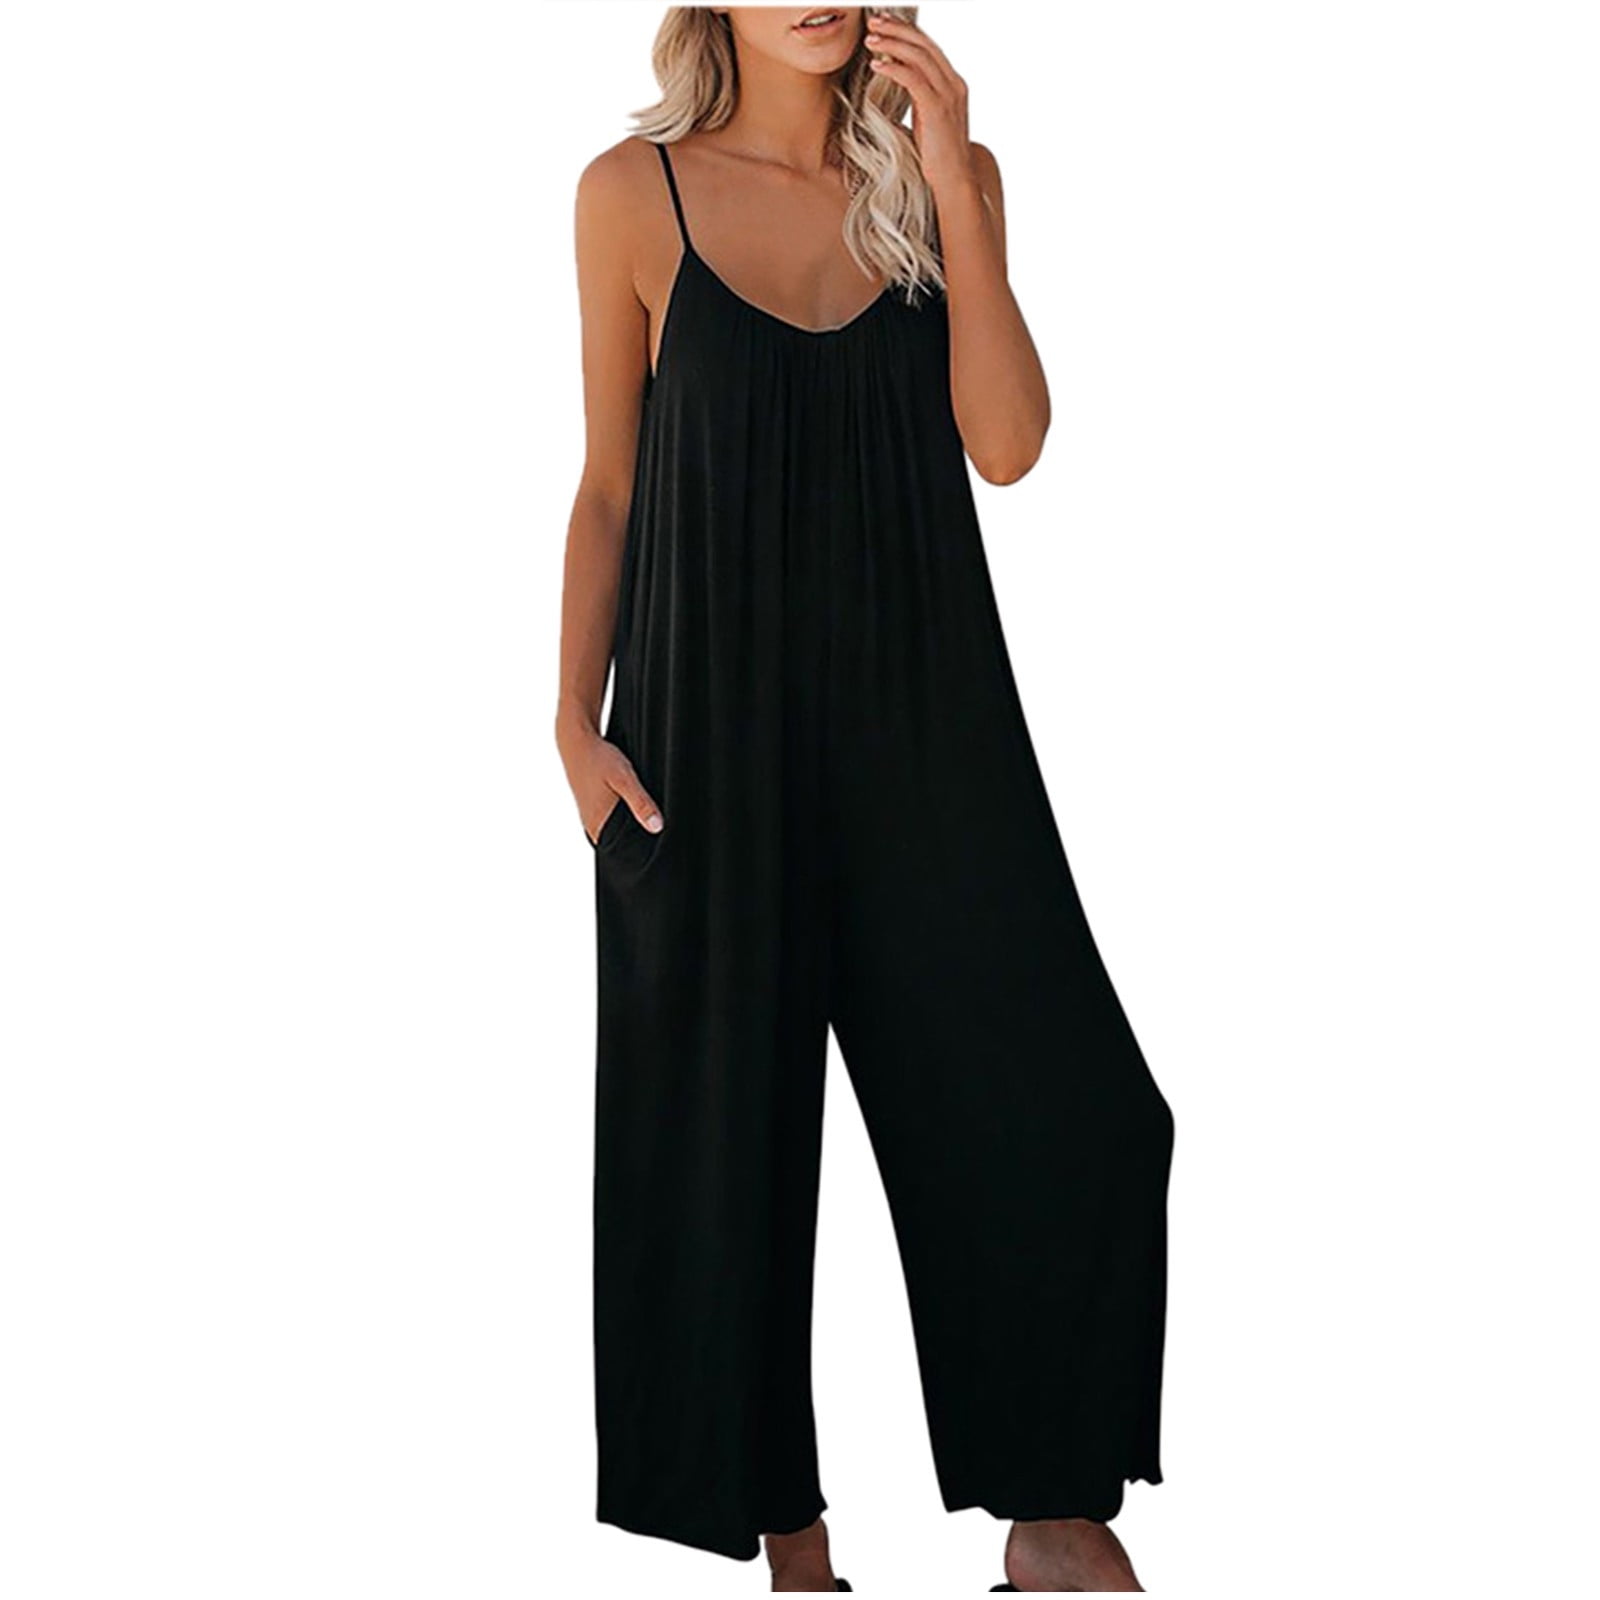  my orders placed Rompers for Women Dressy Casual Sleeveless  Spaghetti Straps Stretchy Loose Long Pants Romper with Pockets : Clothing,  Shoes & Jewelry